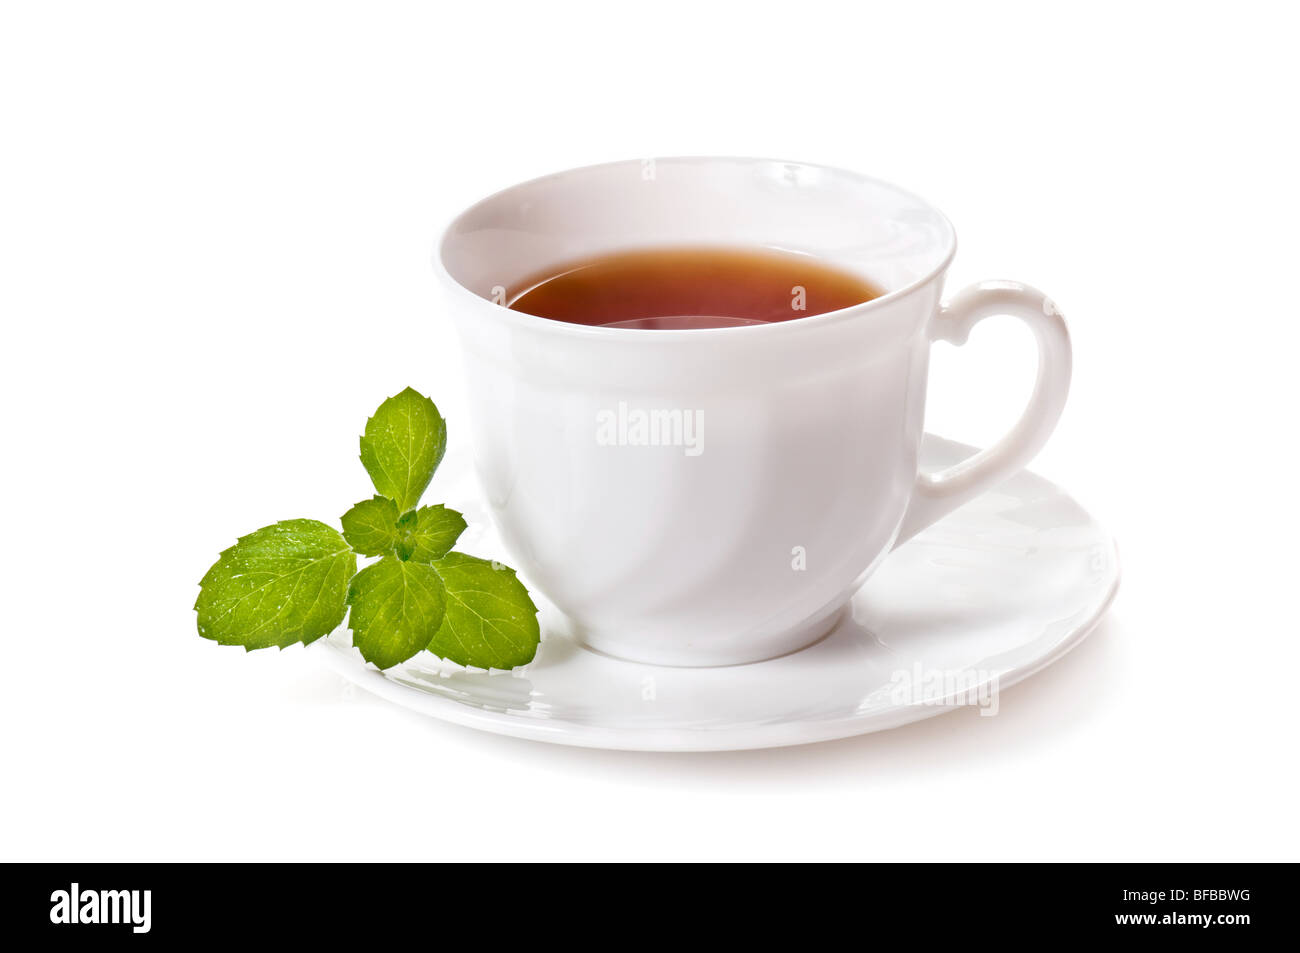 Tea cup with mint leaves on a white background Stock Photo